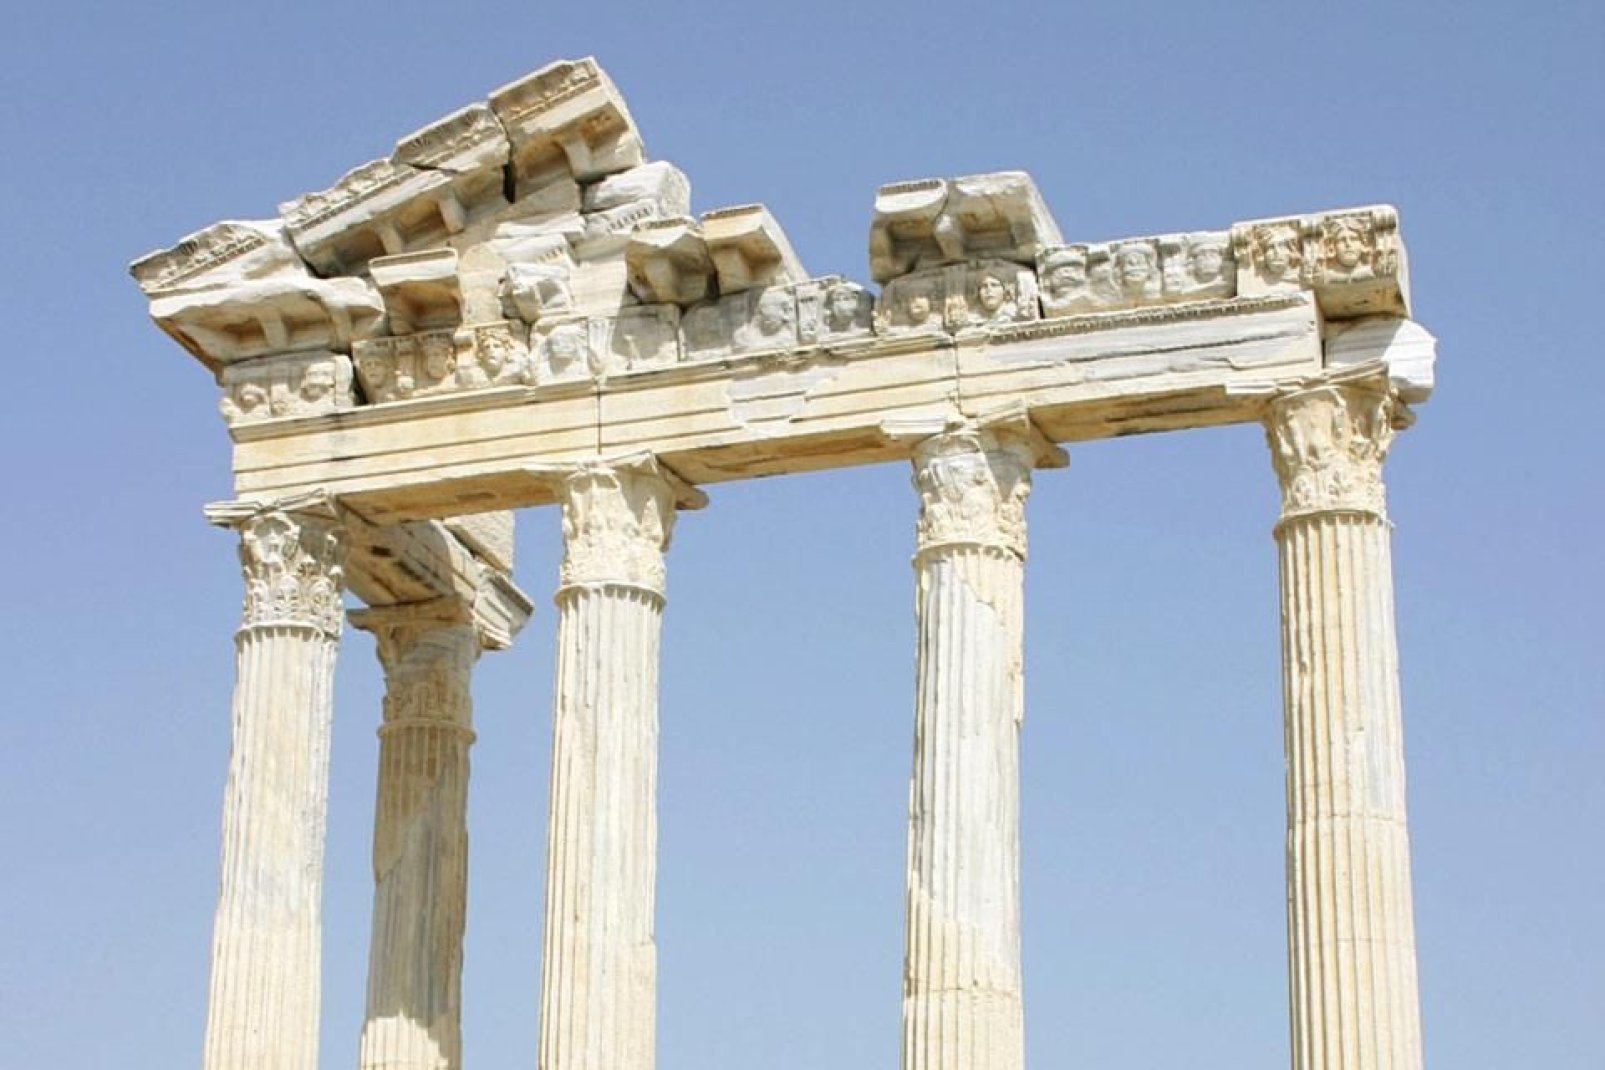 A visit to the ancient sites of Antalya make for great little day trips on the side